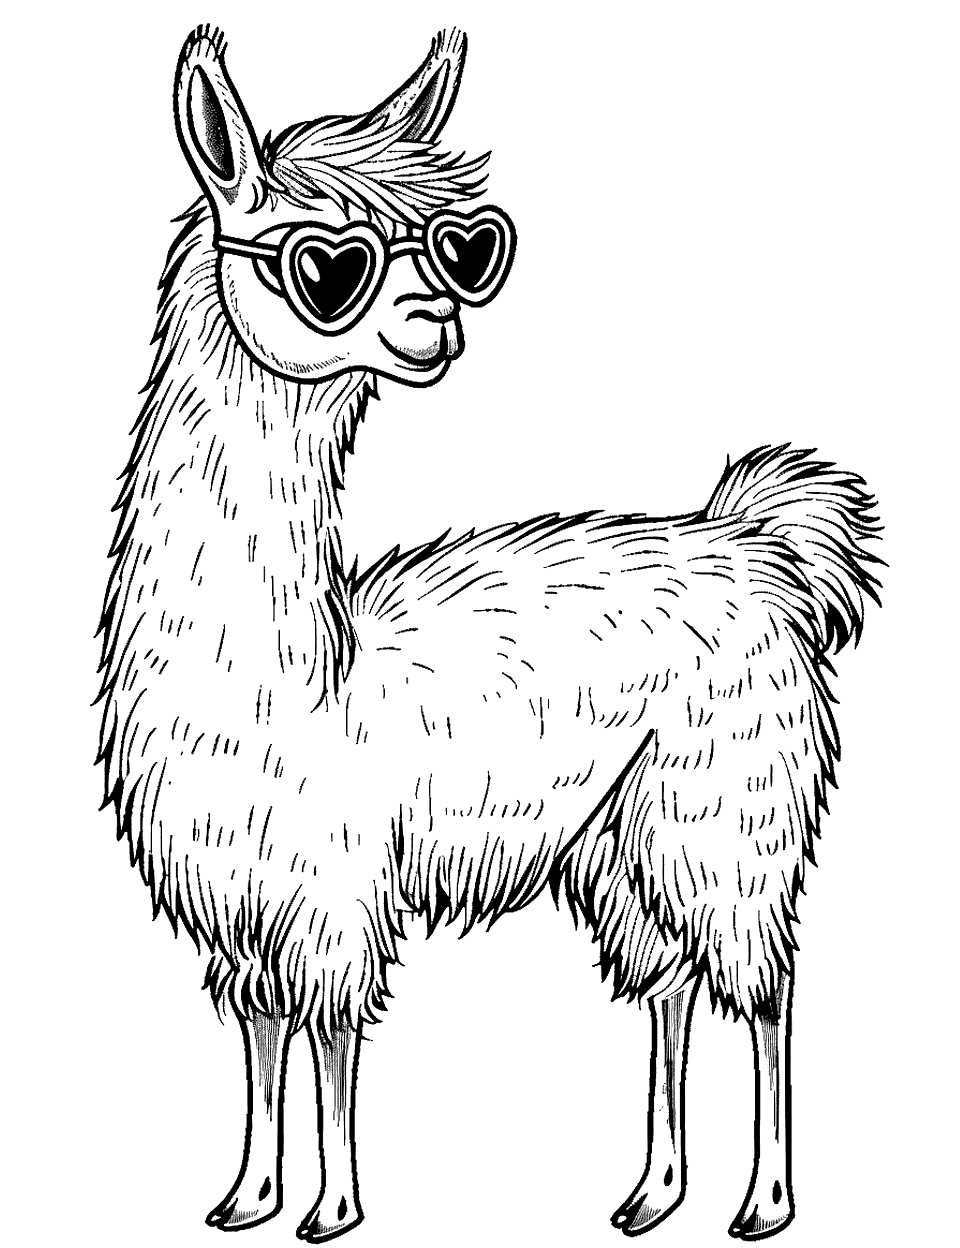 Llama with Heart-Shaped Glasses Coloring Page - A llama looking charming in heart-shaped sunglasses.